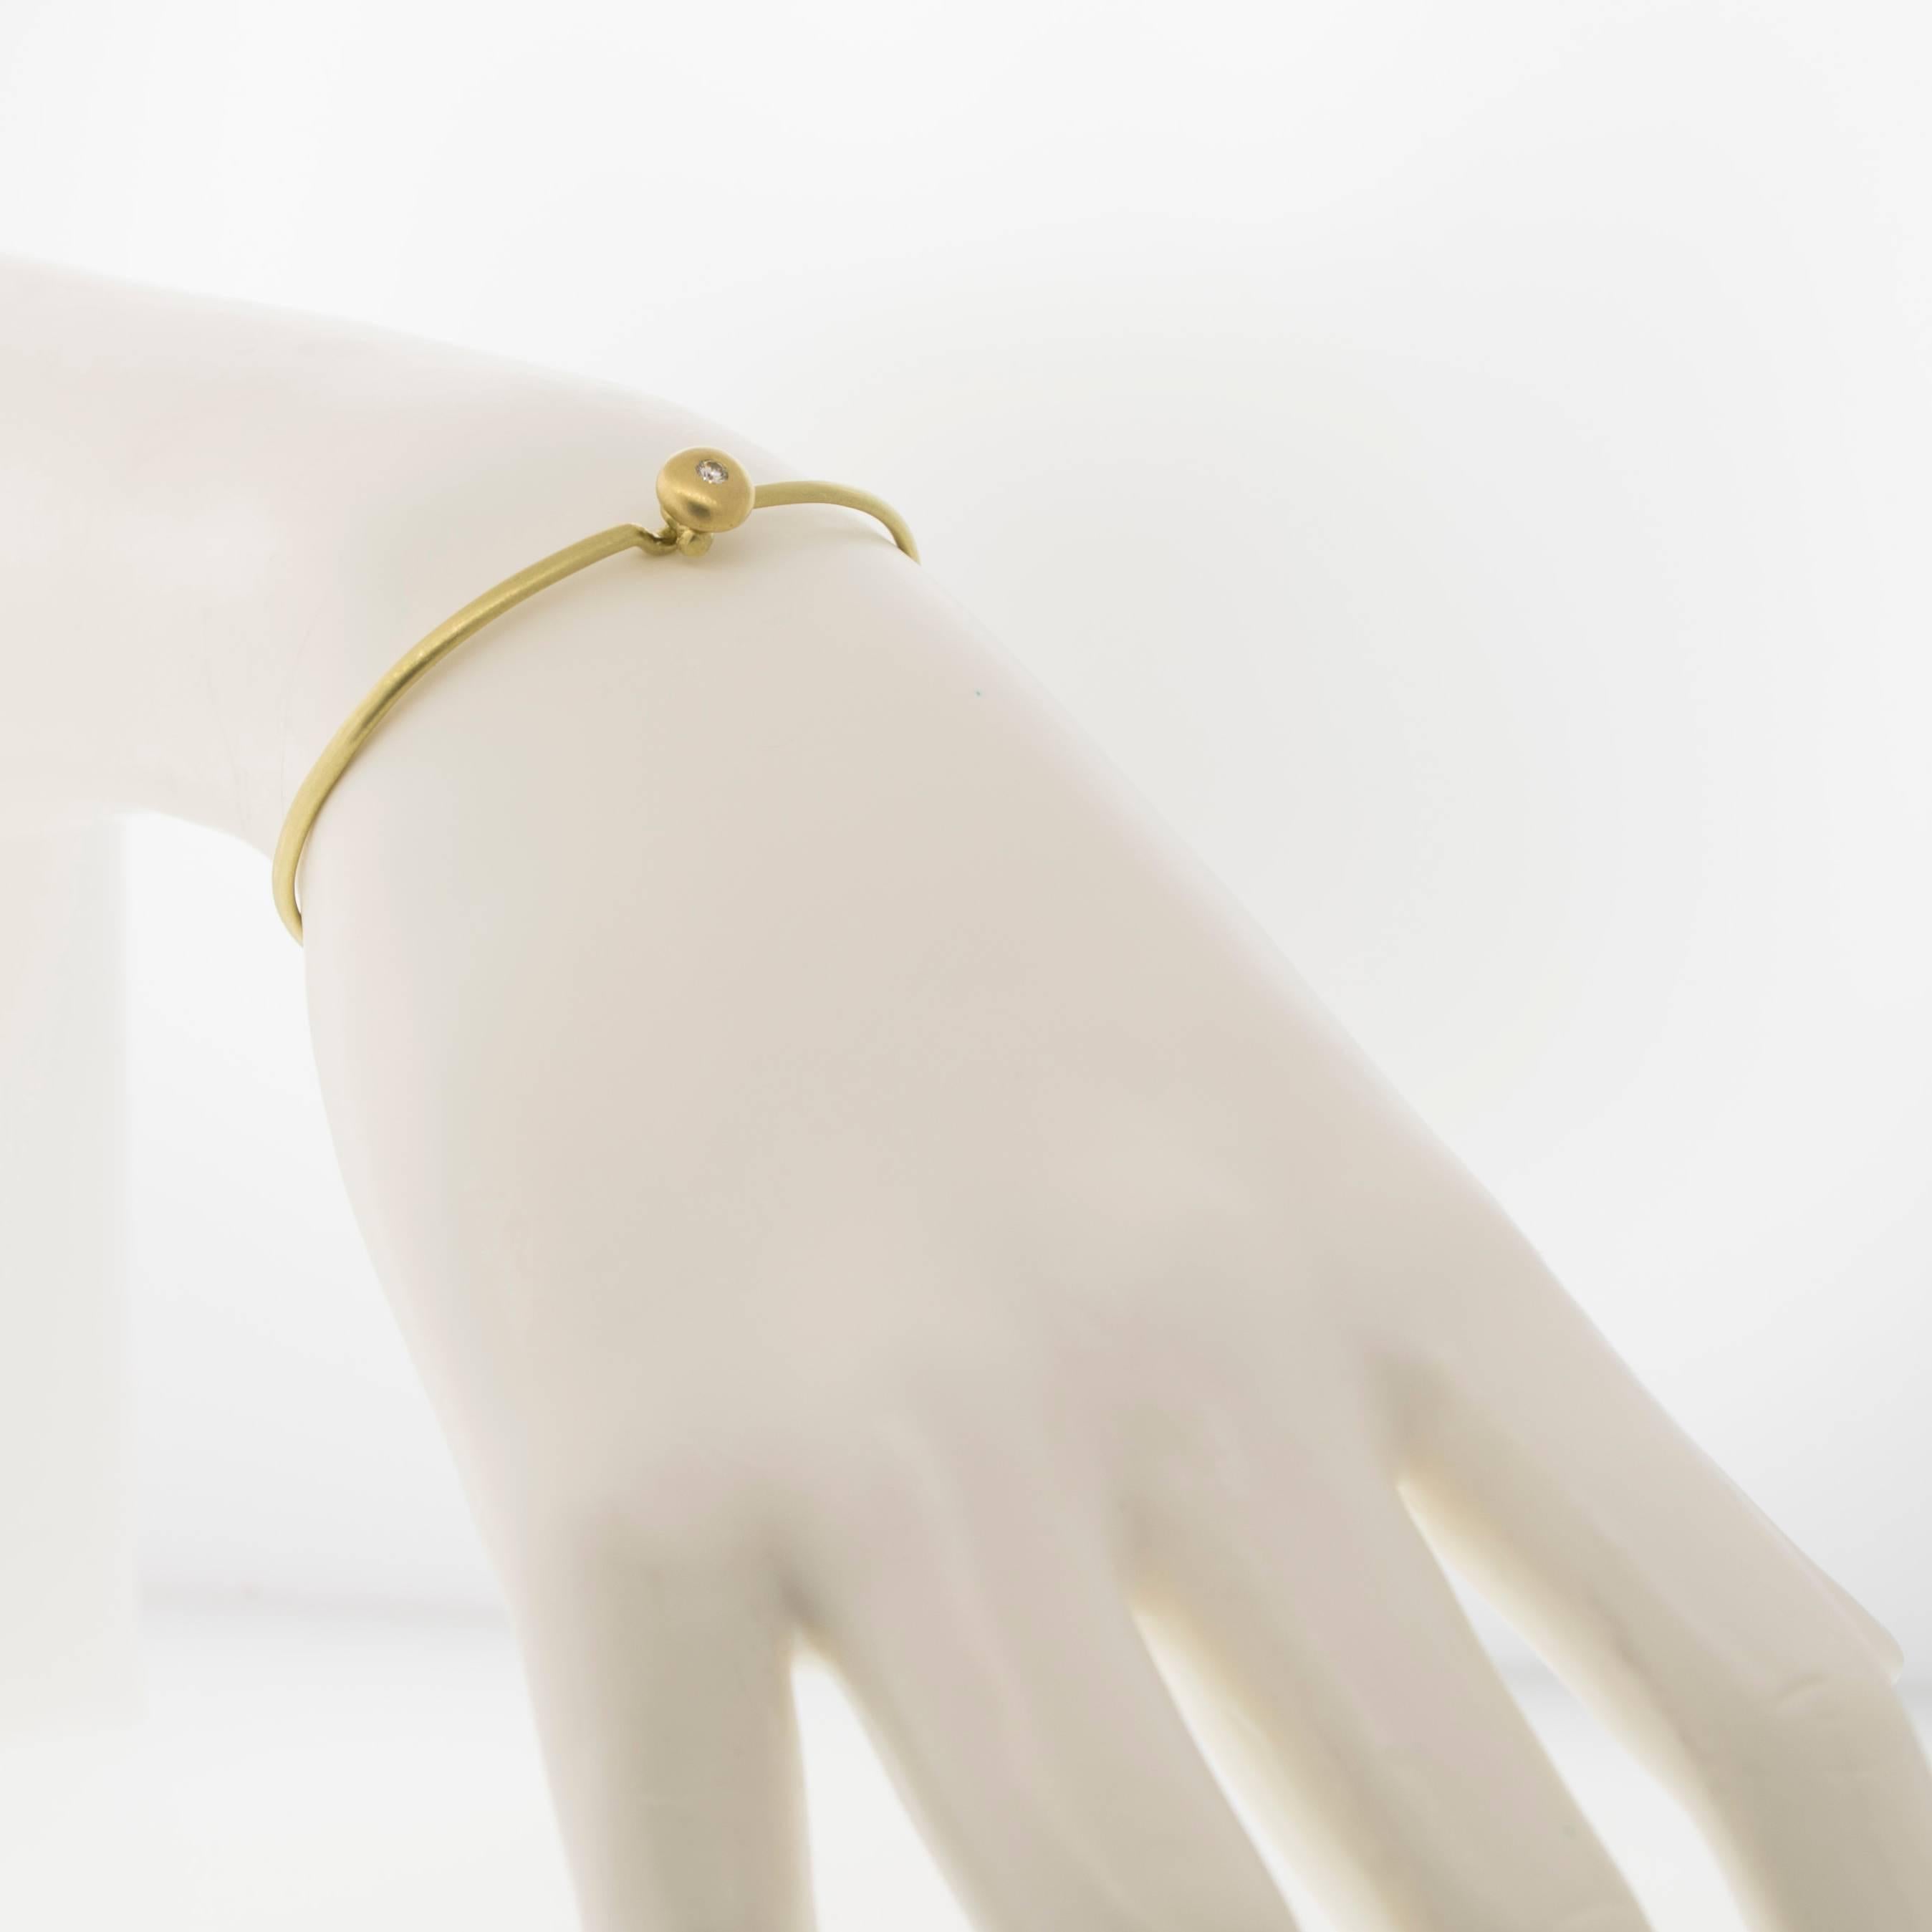 Simply beautiful, this 18k gold bangle is handmade to be slightly fitted with an inner diameter of 2.25 inches.  The diamond button is approximately .25 inch in diameter, burnished with a bright white round brilliant-cut diamond.  .6 cts

Shown